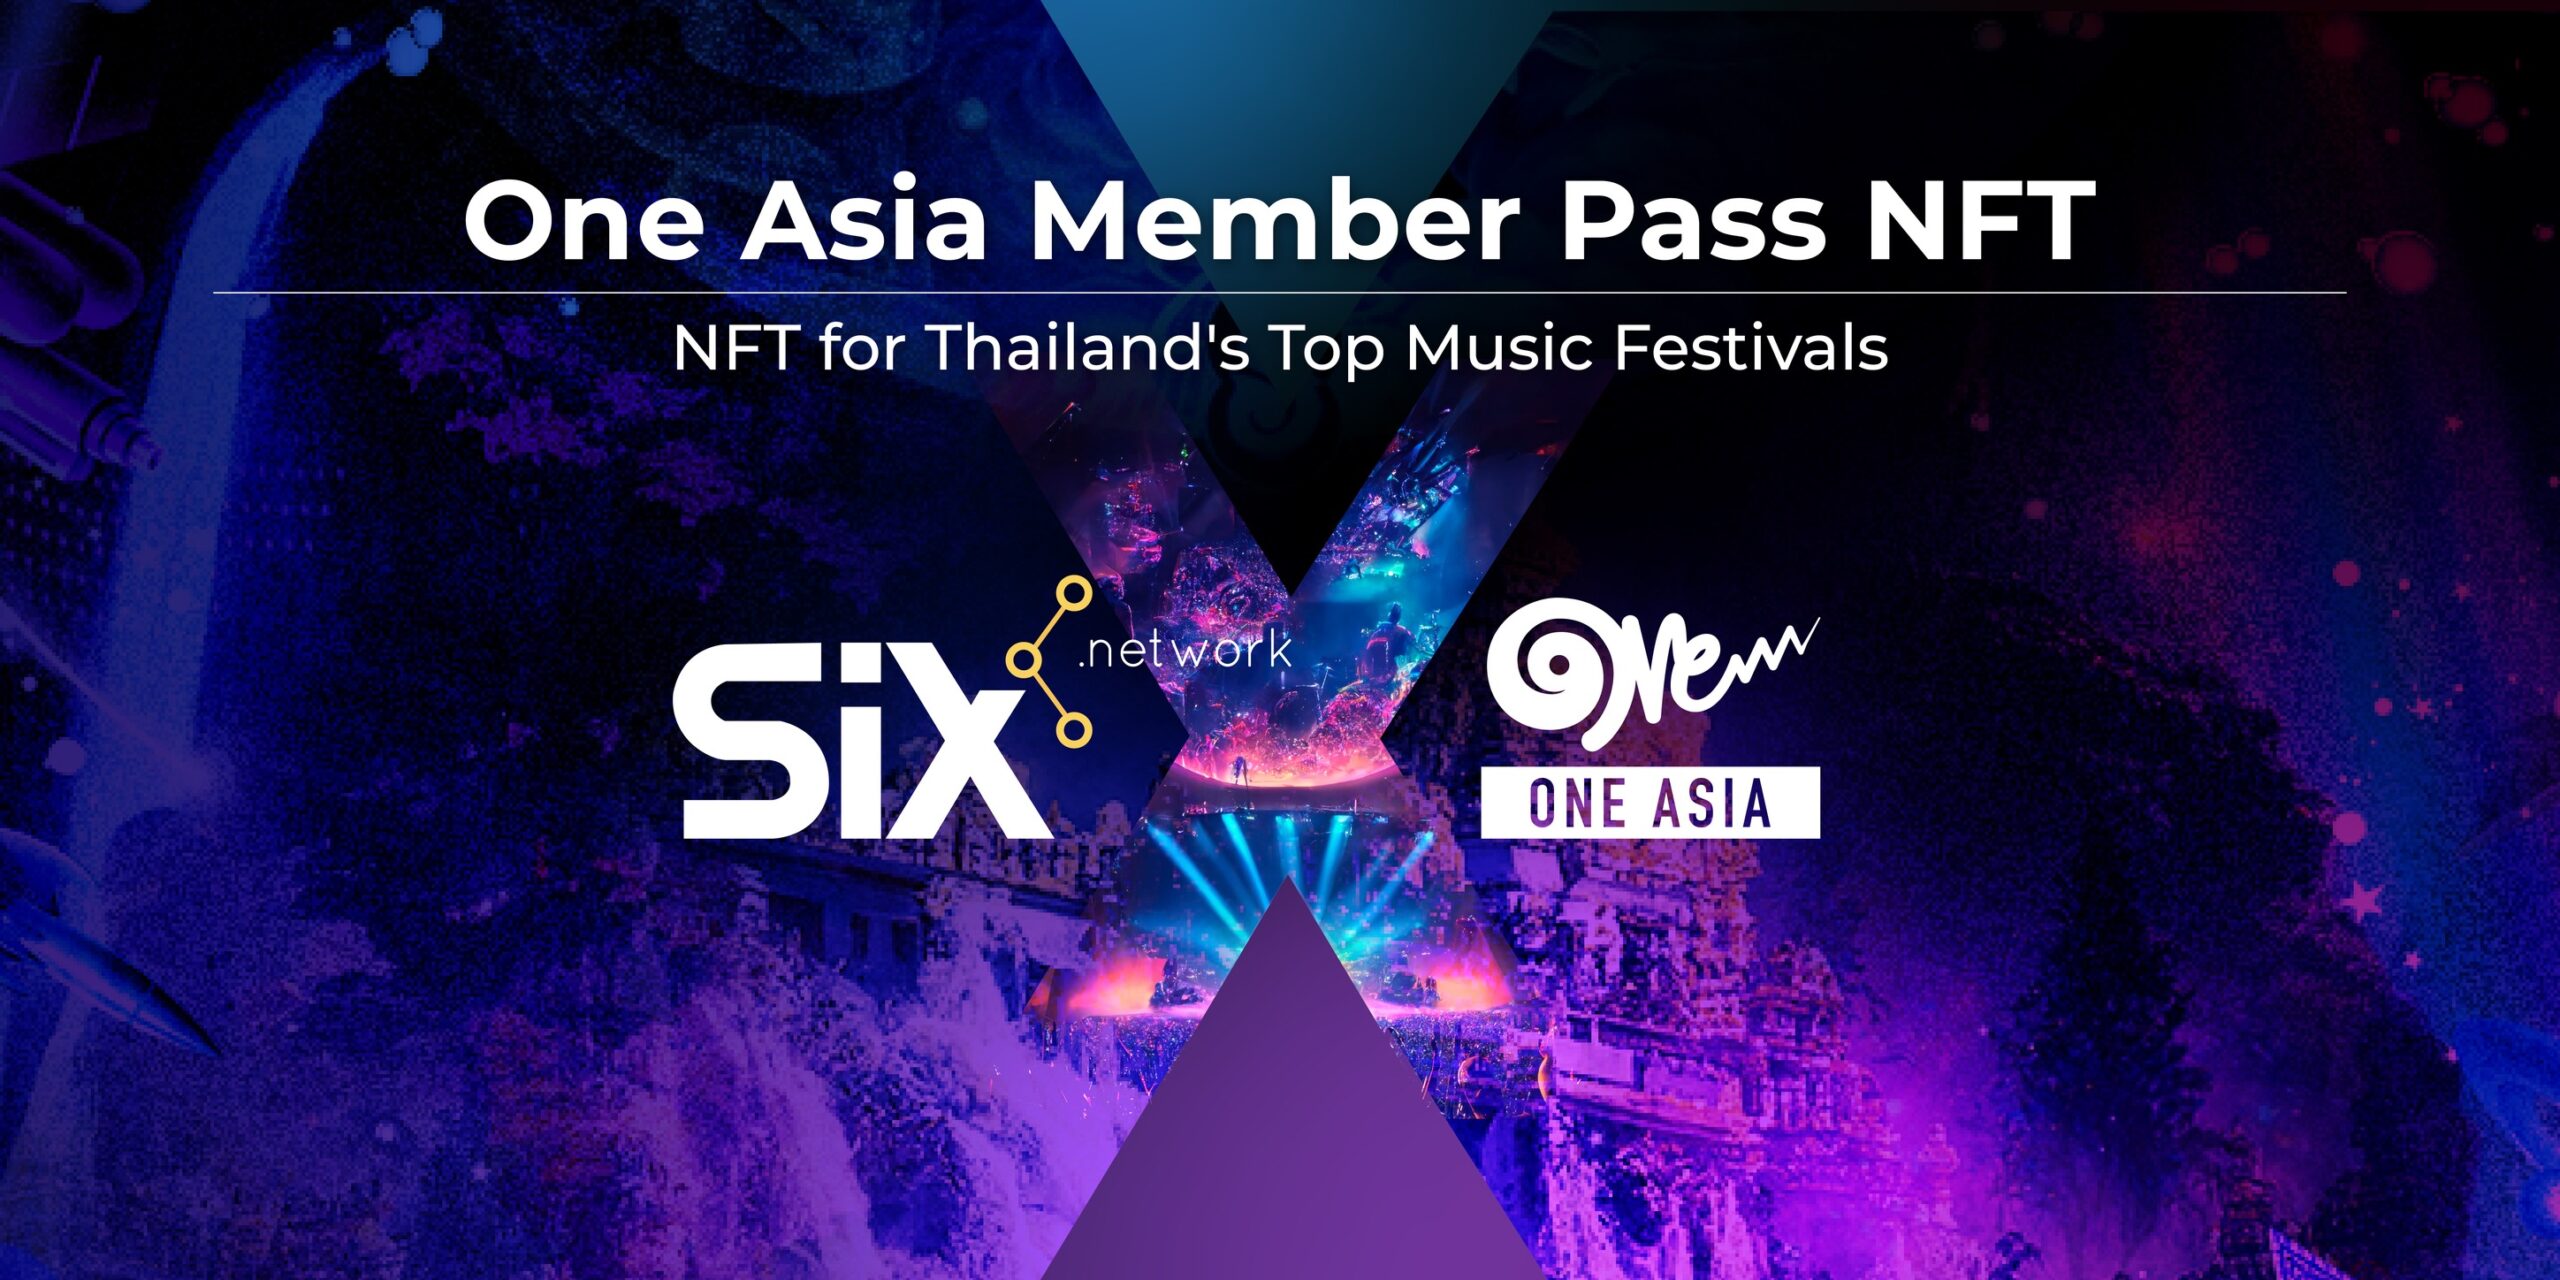 SIX Network introduced One Asia Member Pass NFT